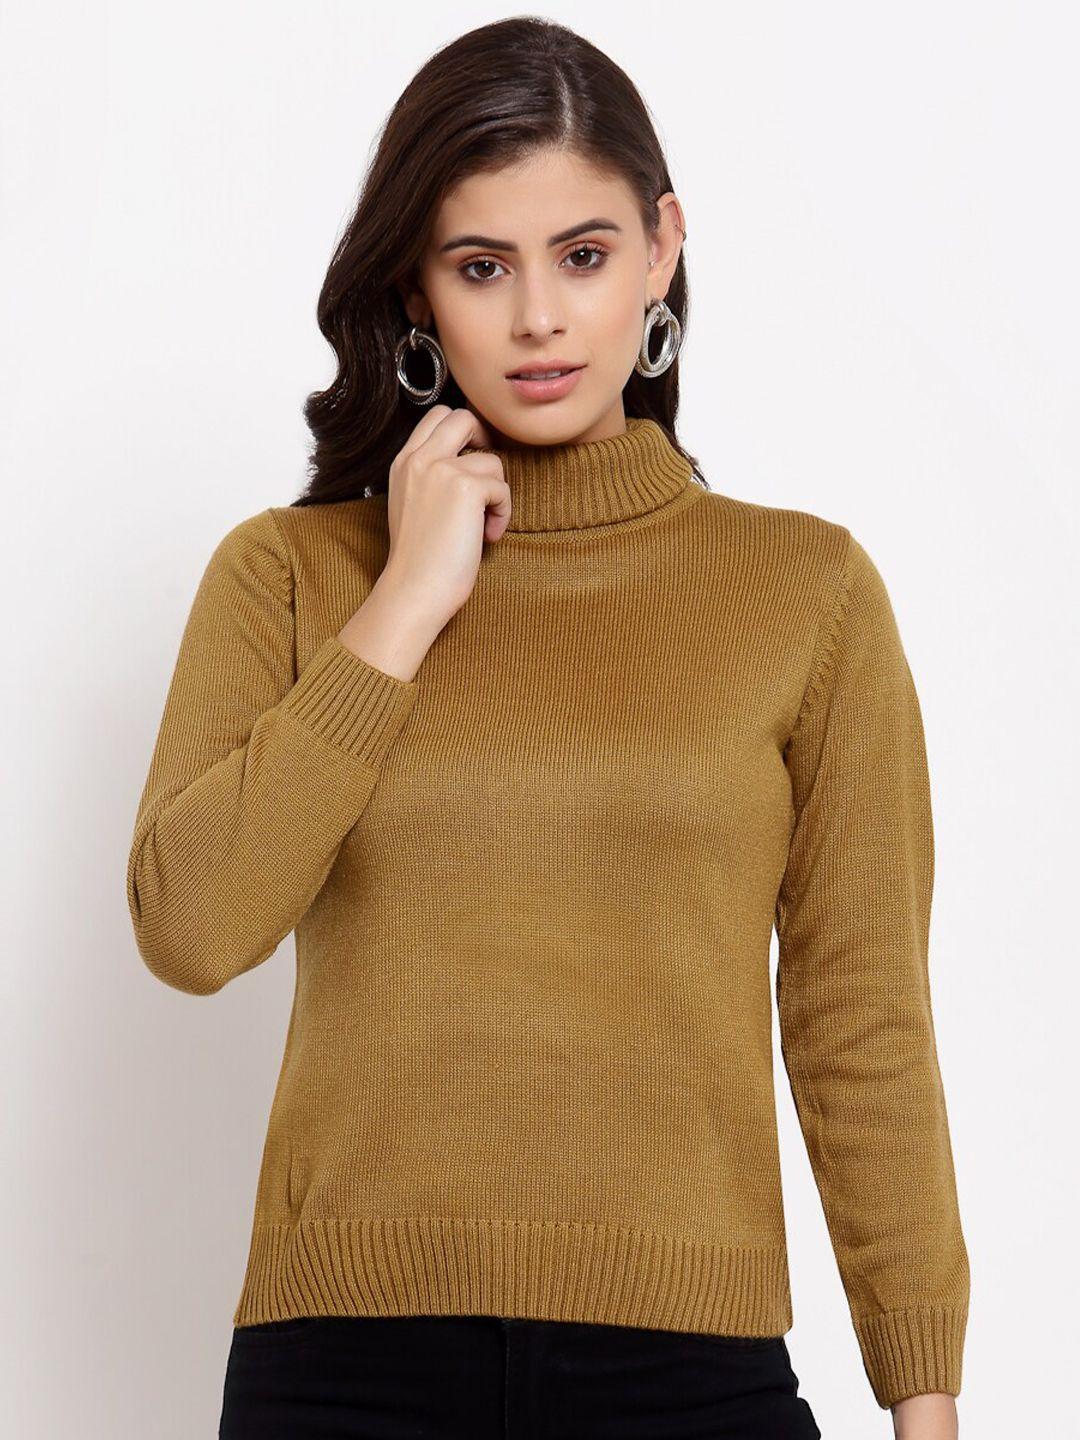 style-quotient-women-camel-brown-acrylic-pullover